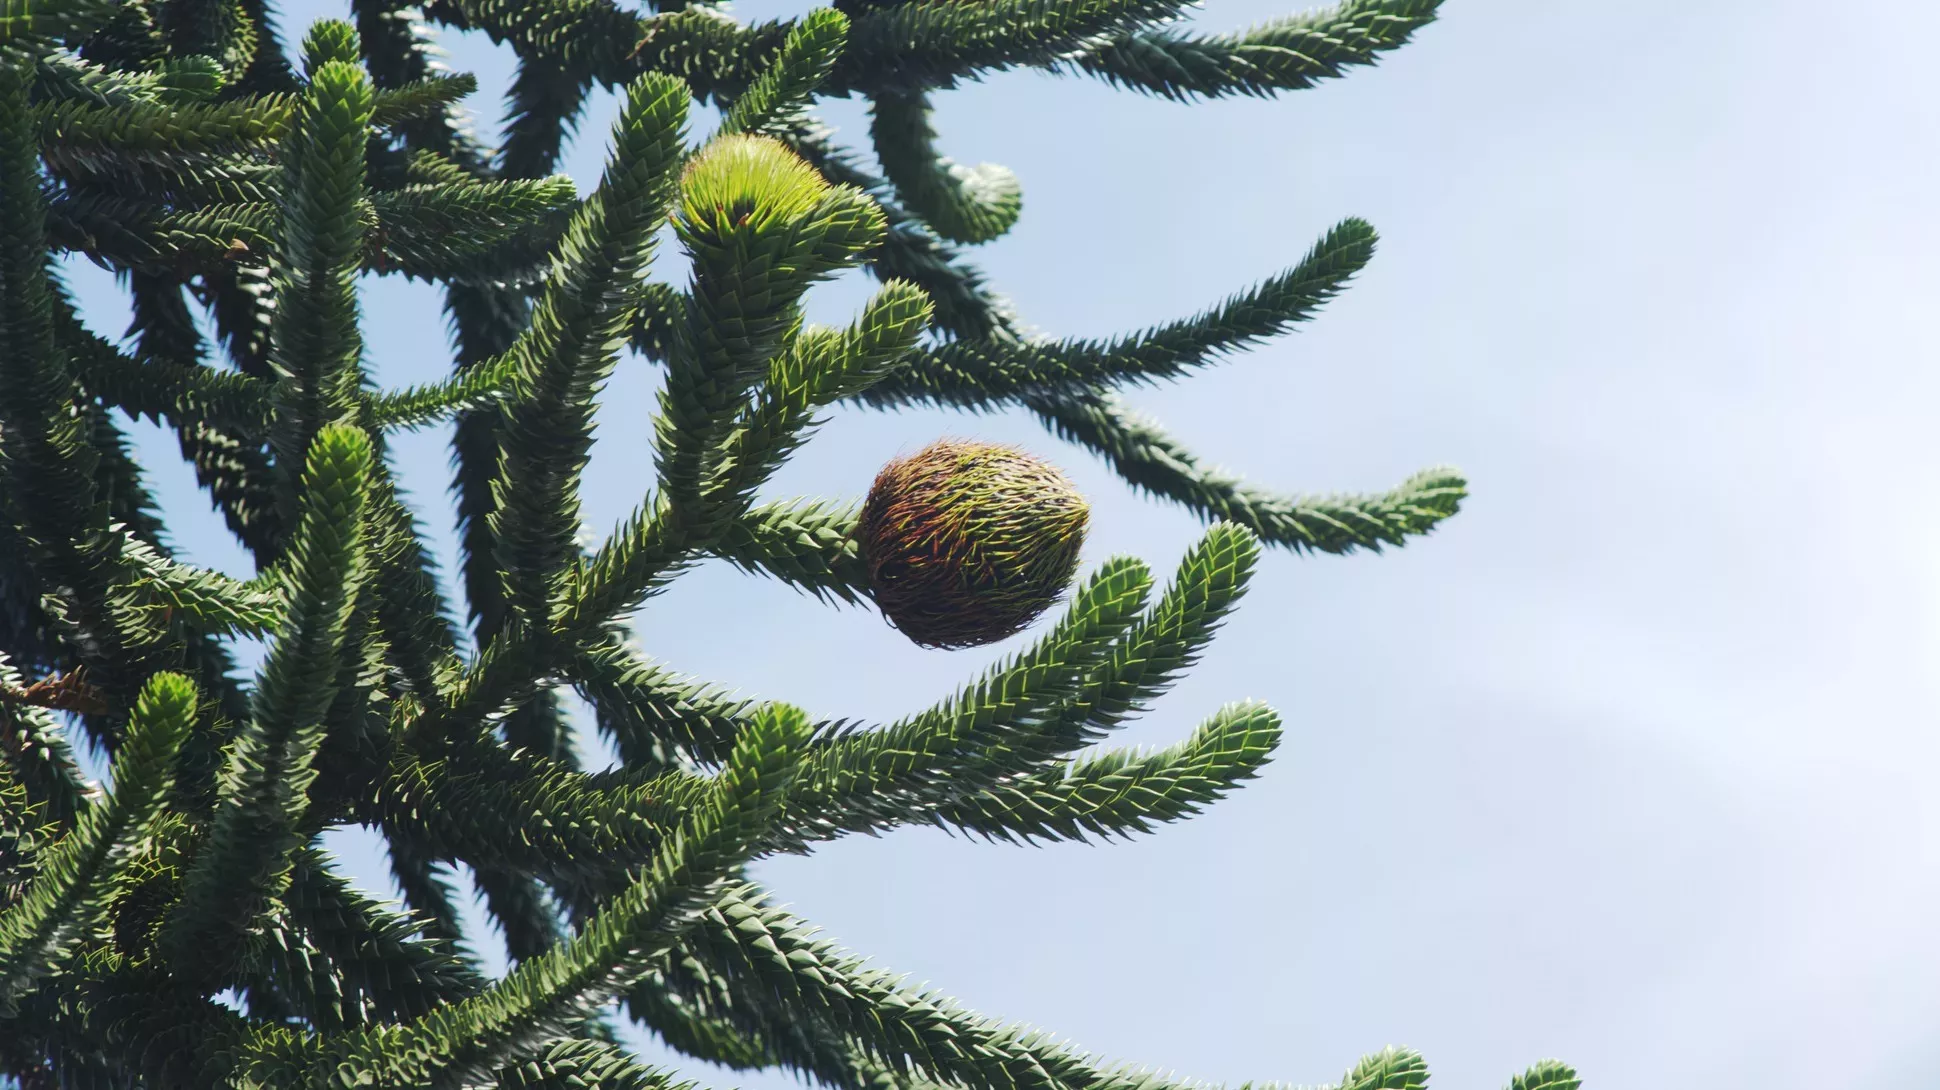 A large round green brown seed code growing on a monkey puzzle tree